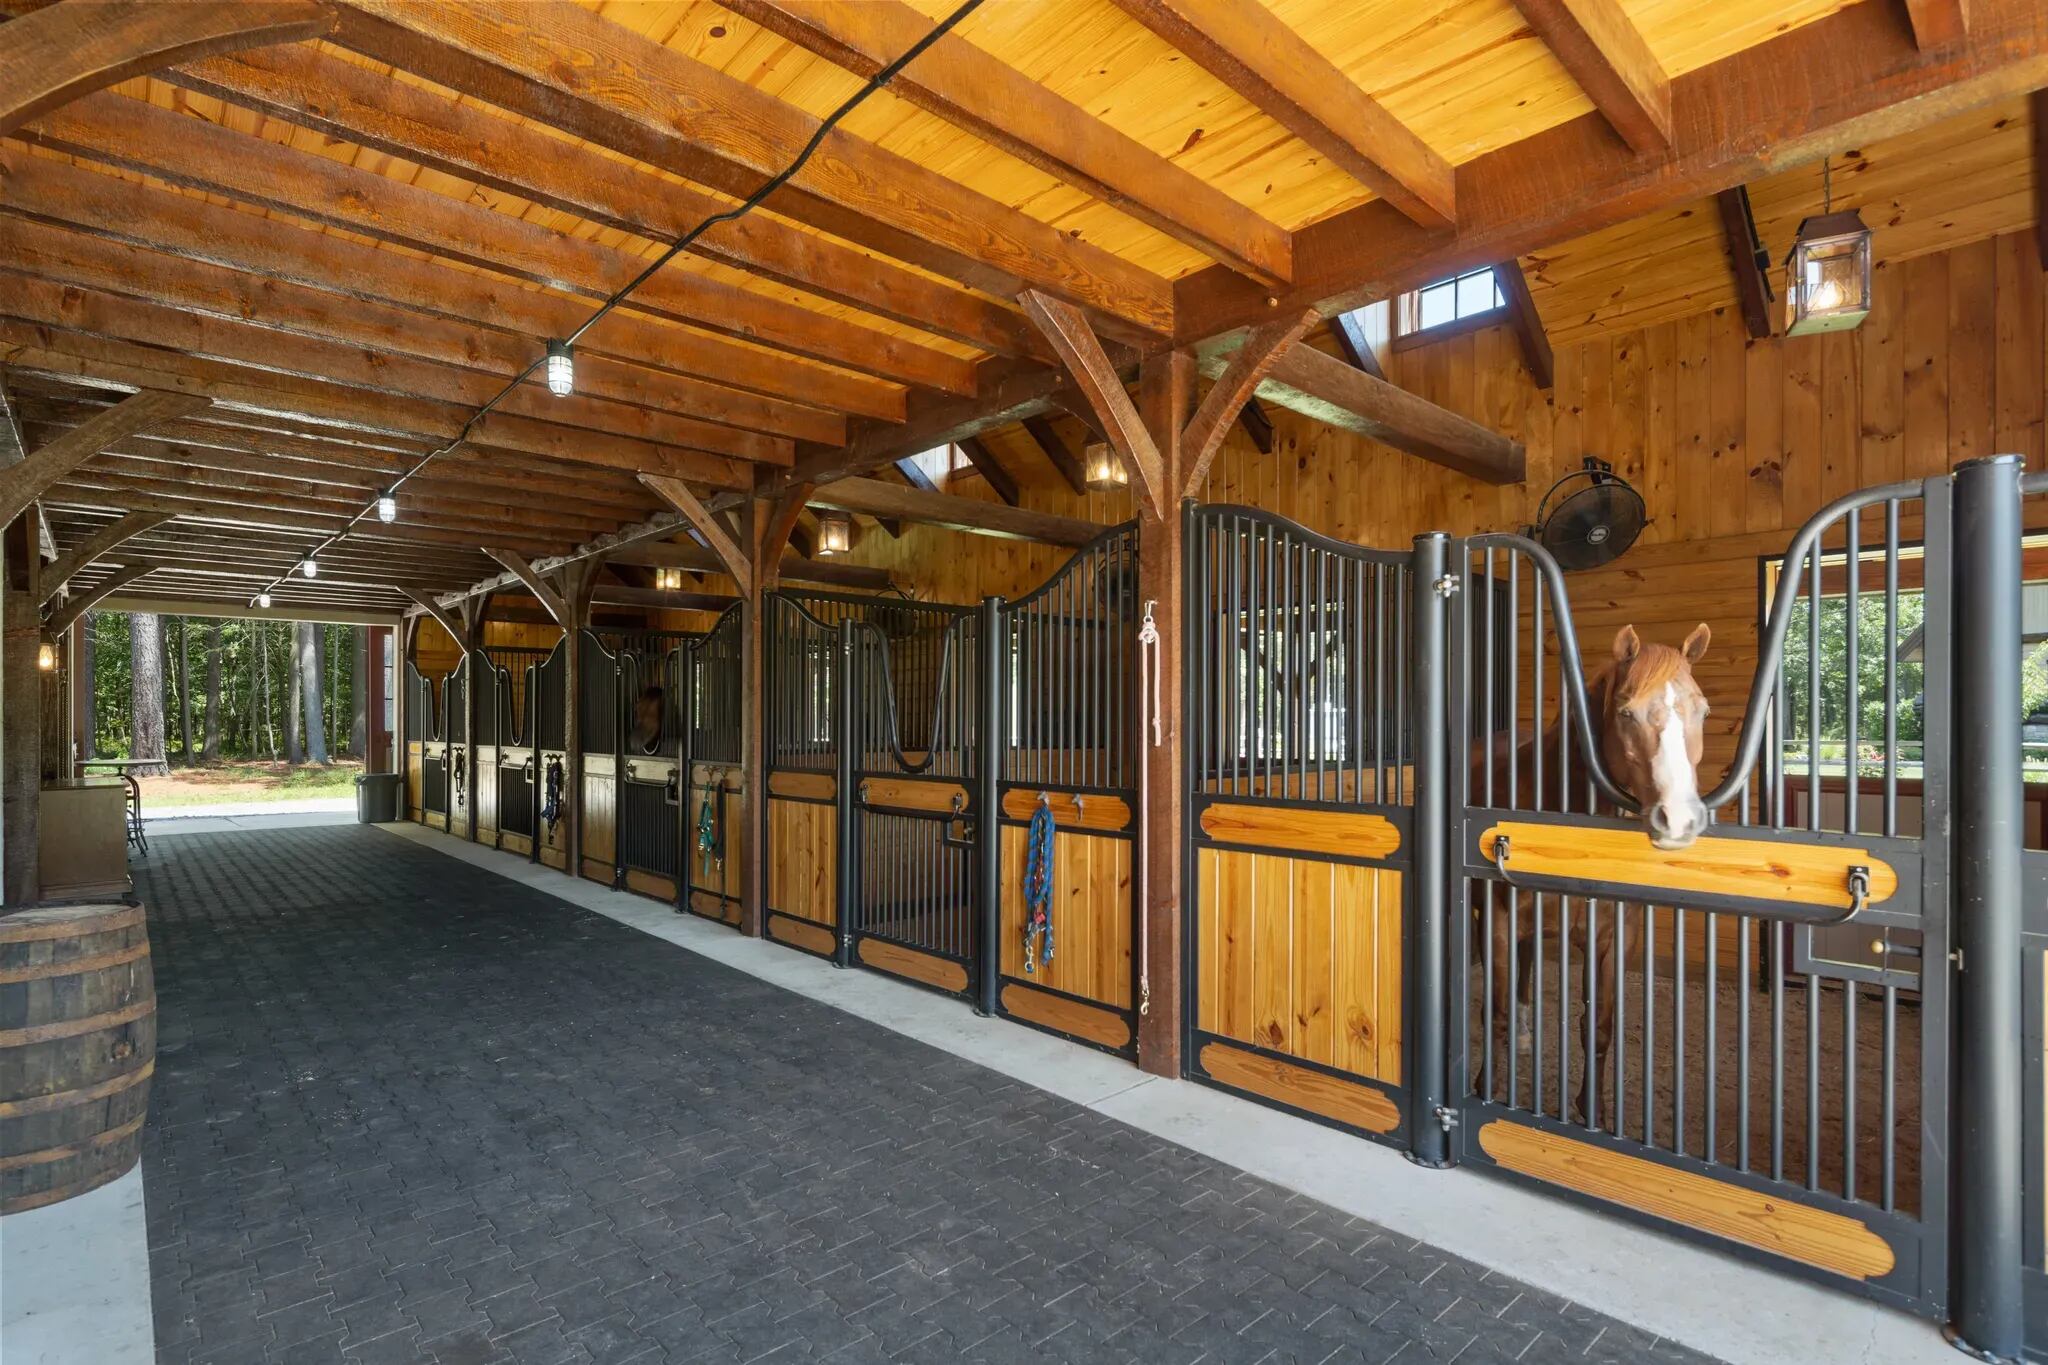 All five modular horse stalls in the Amish-built barn are equipped with fans, cameras for monitoring, and rubber mats. The barn also has a tack room with lockers, a wash stall, a kitchenette and a guest suite with a full bathroom.